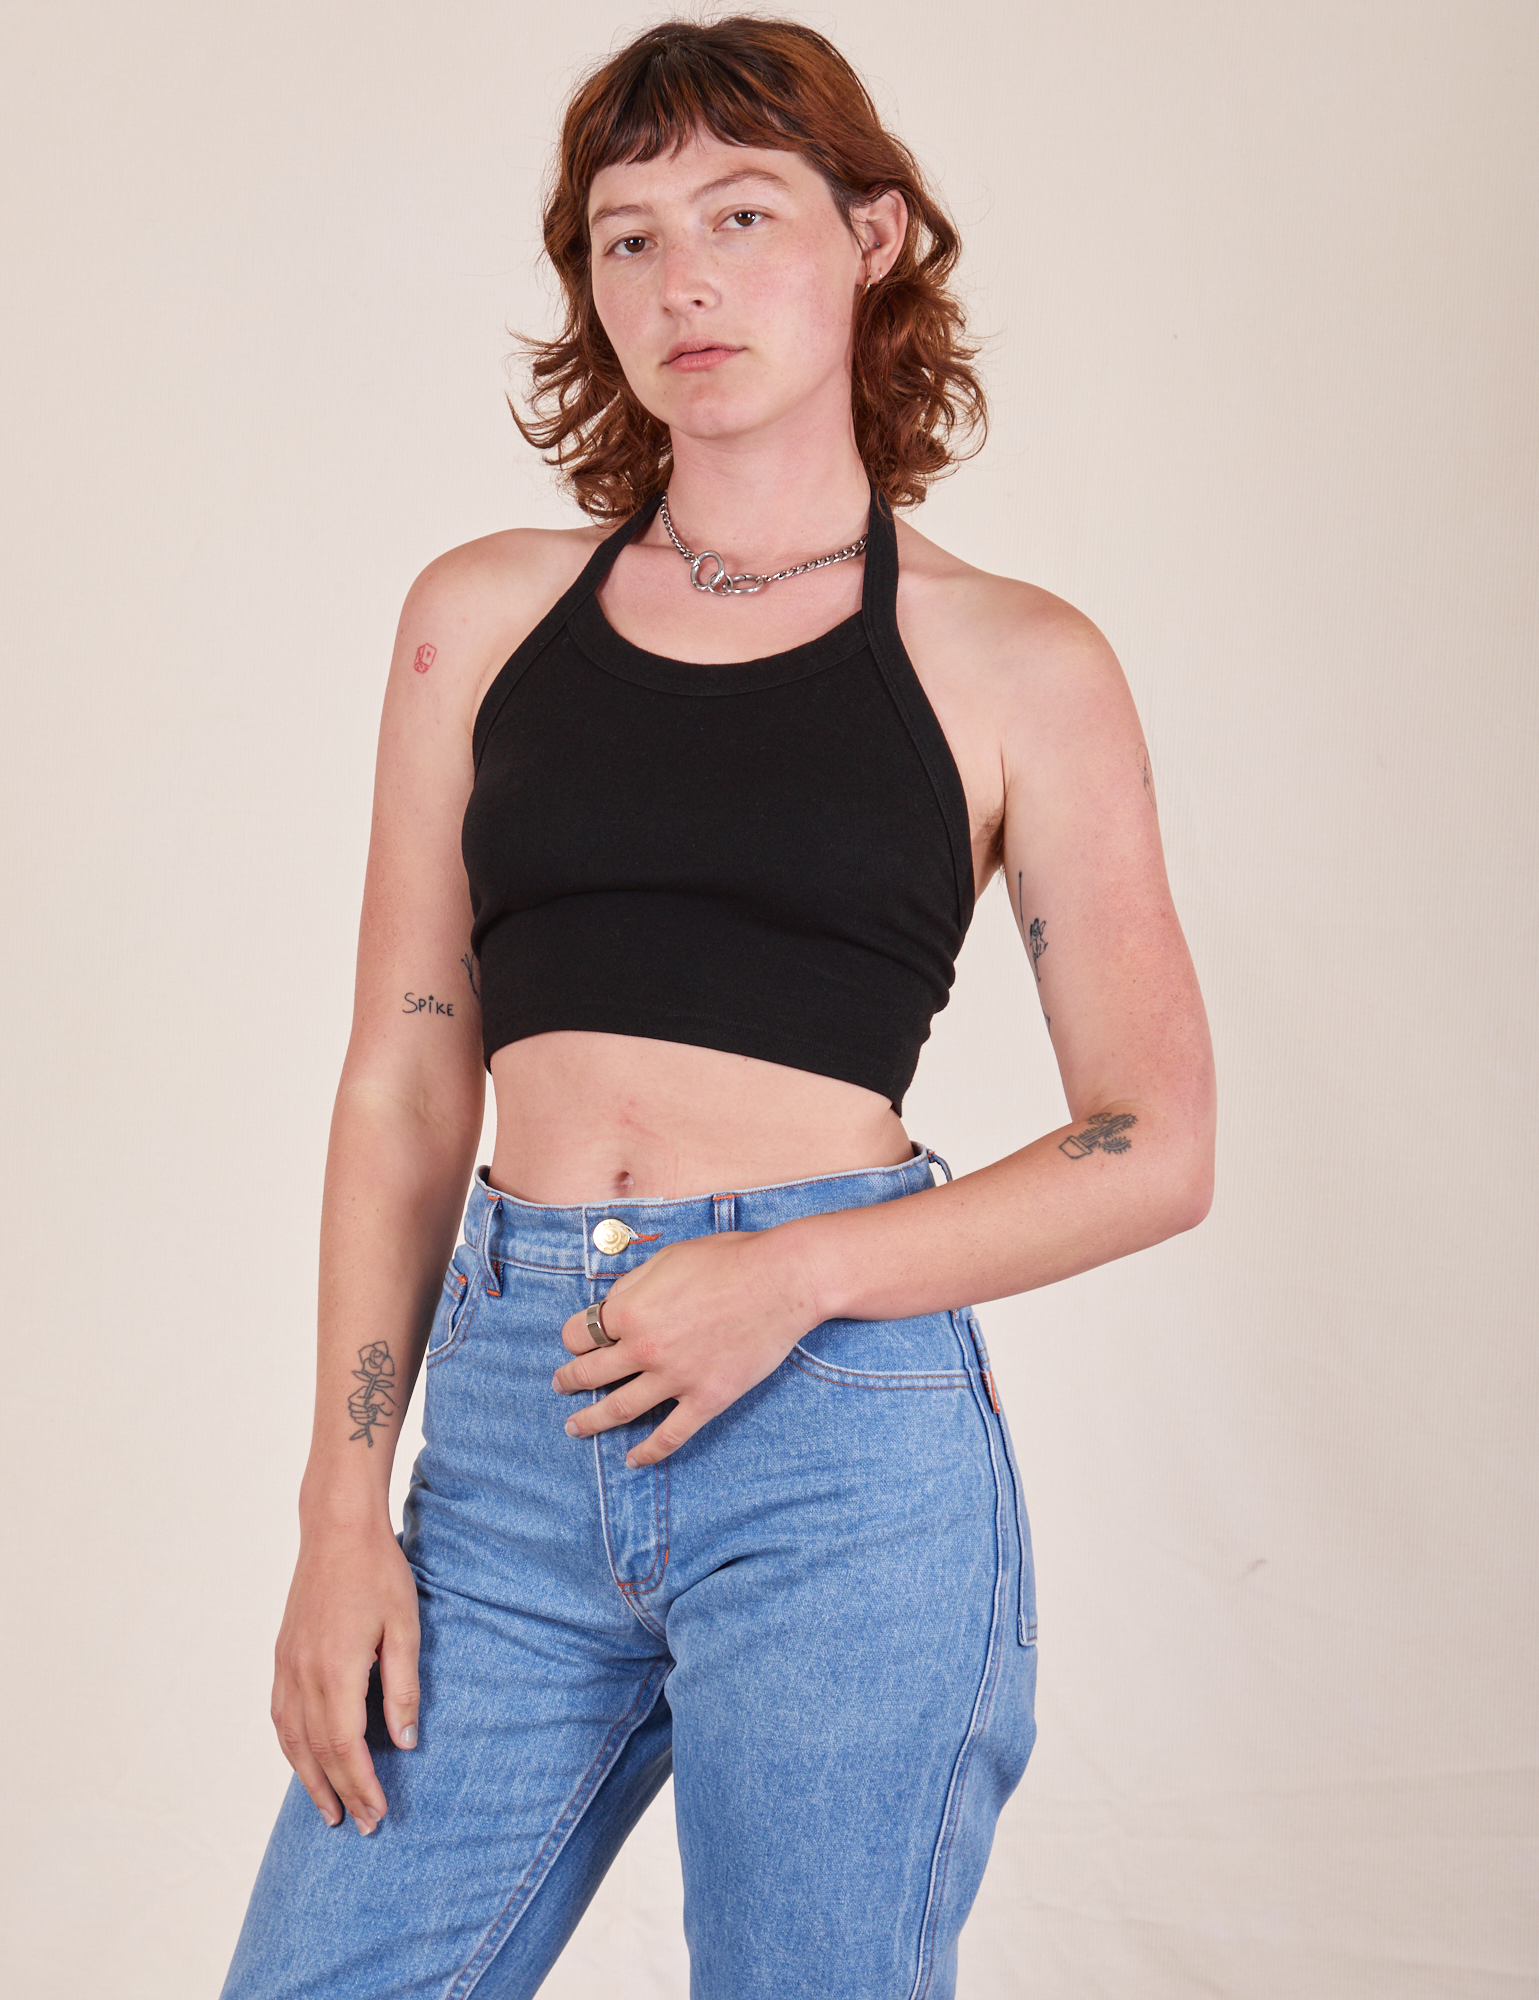 Alex is 5&#39;8&quot; and wearing P Halter Top in Basic Black and light wash Frontier Jeans